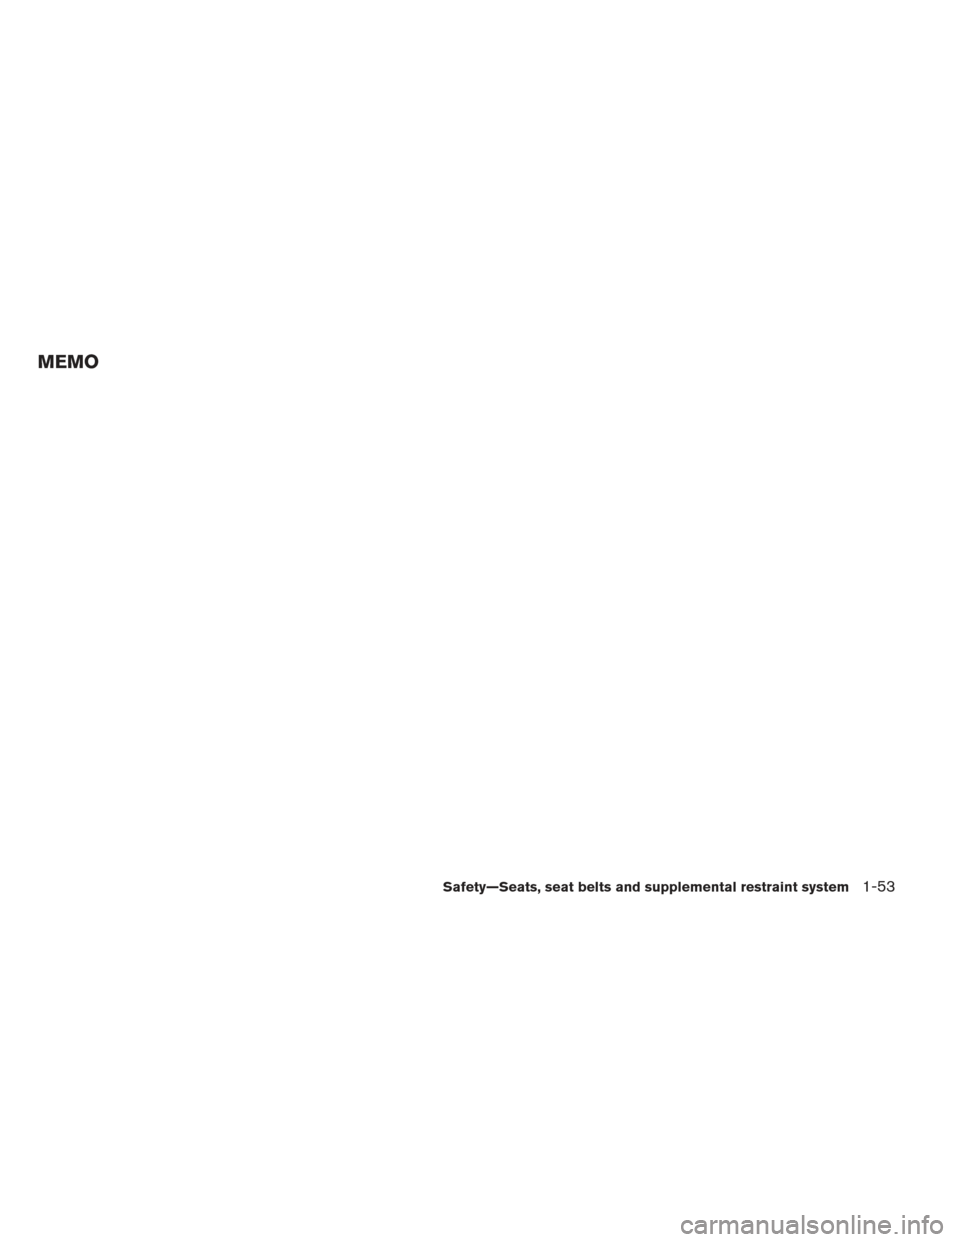 NISSAN MAXIMA 2013 A35 / 7.G Repair Manual MEMO
Safety—Seats, seat belts and supplemental restraint system1-53 